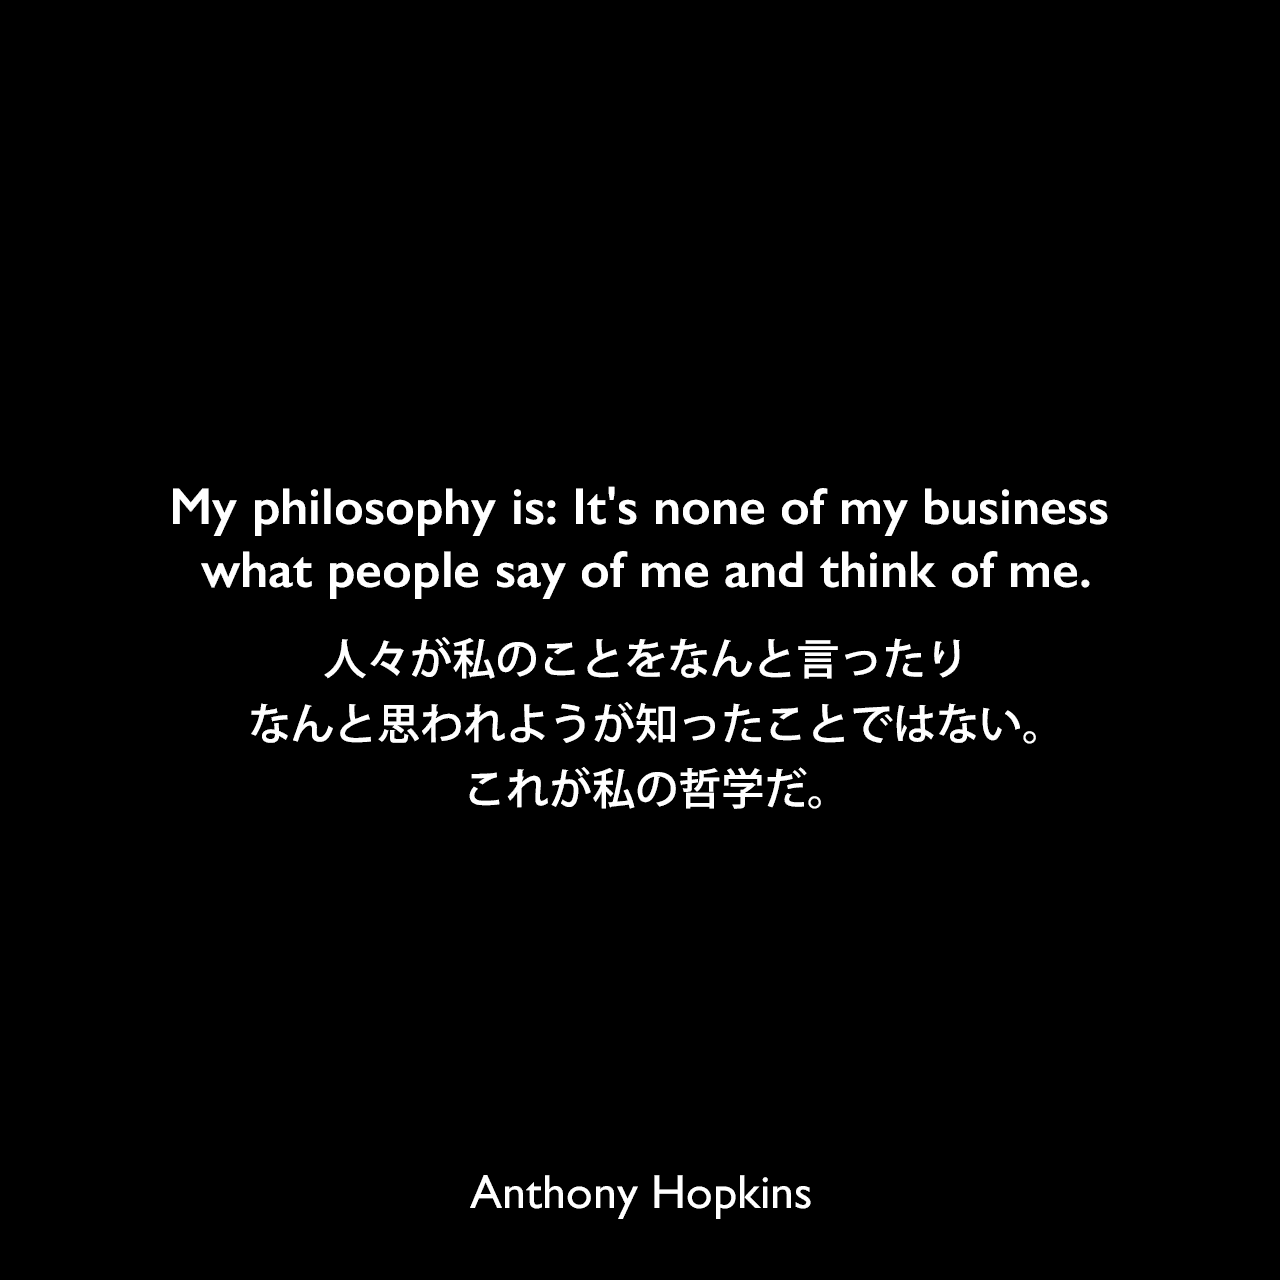 My philosophy is: It's none of my business what people say of me and think of me.人々が私のことをなんと言ったりなんと思われようが知ったことではない。これが私の哲学だ。Anthony Hopkins